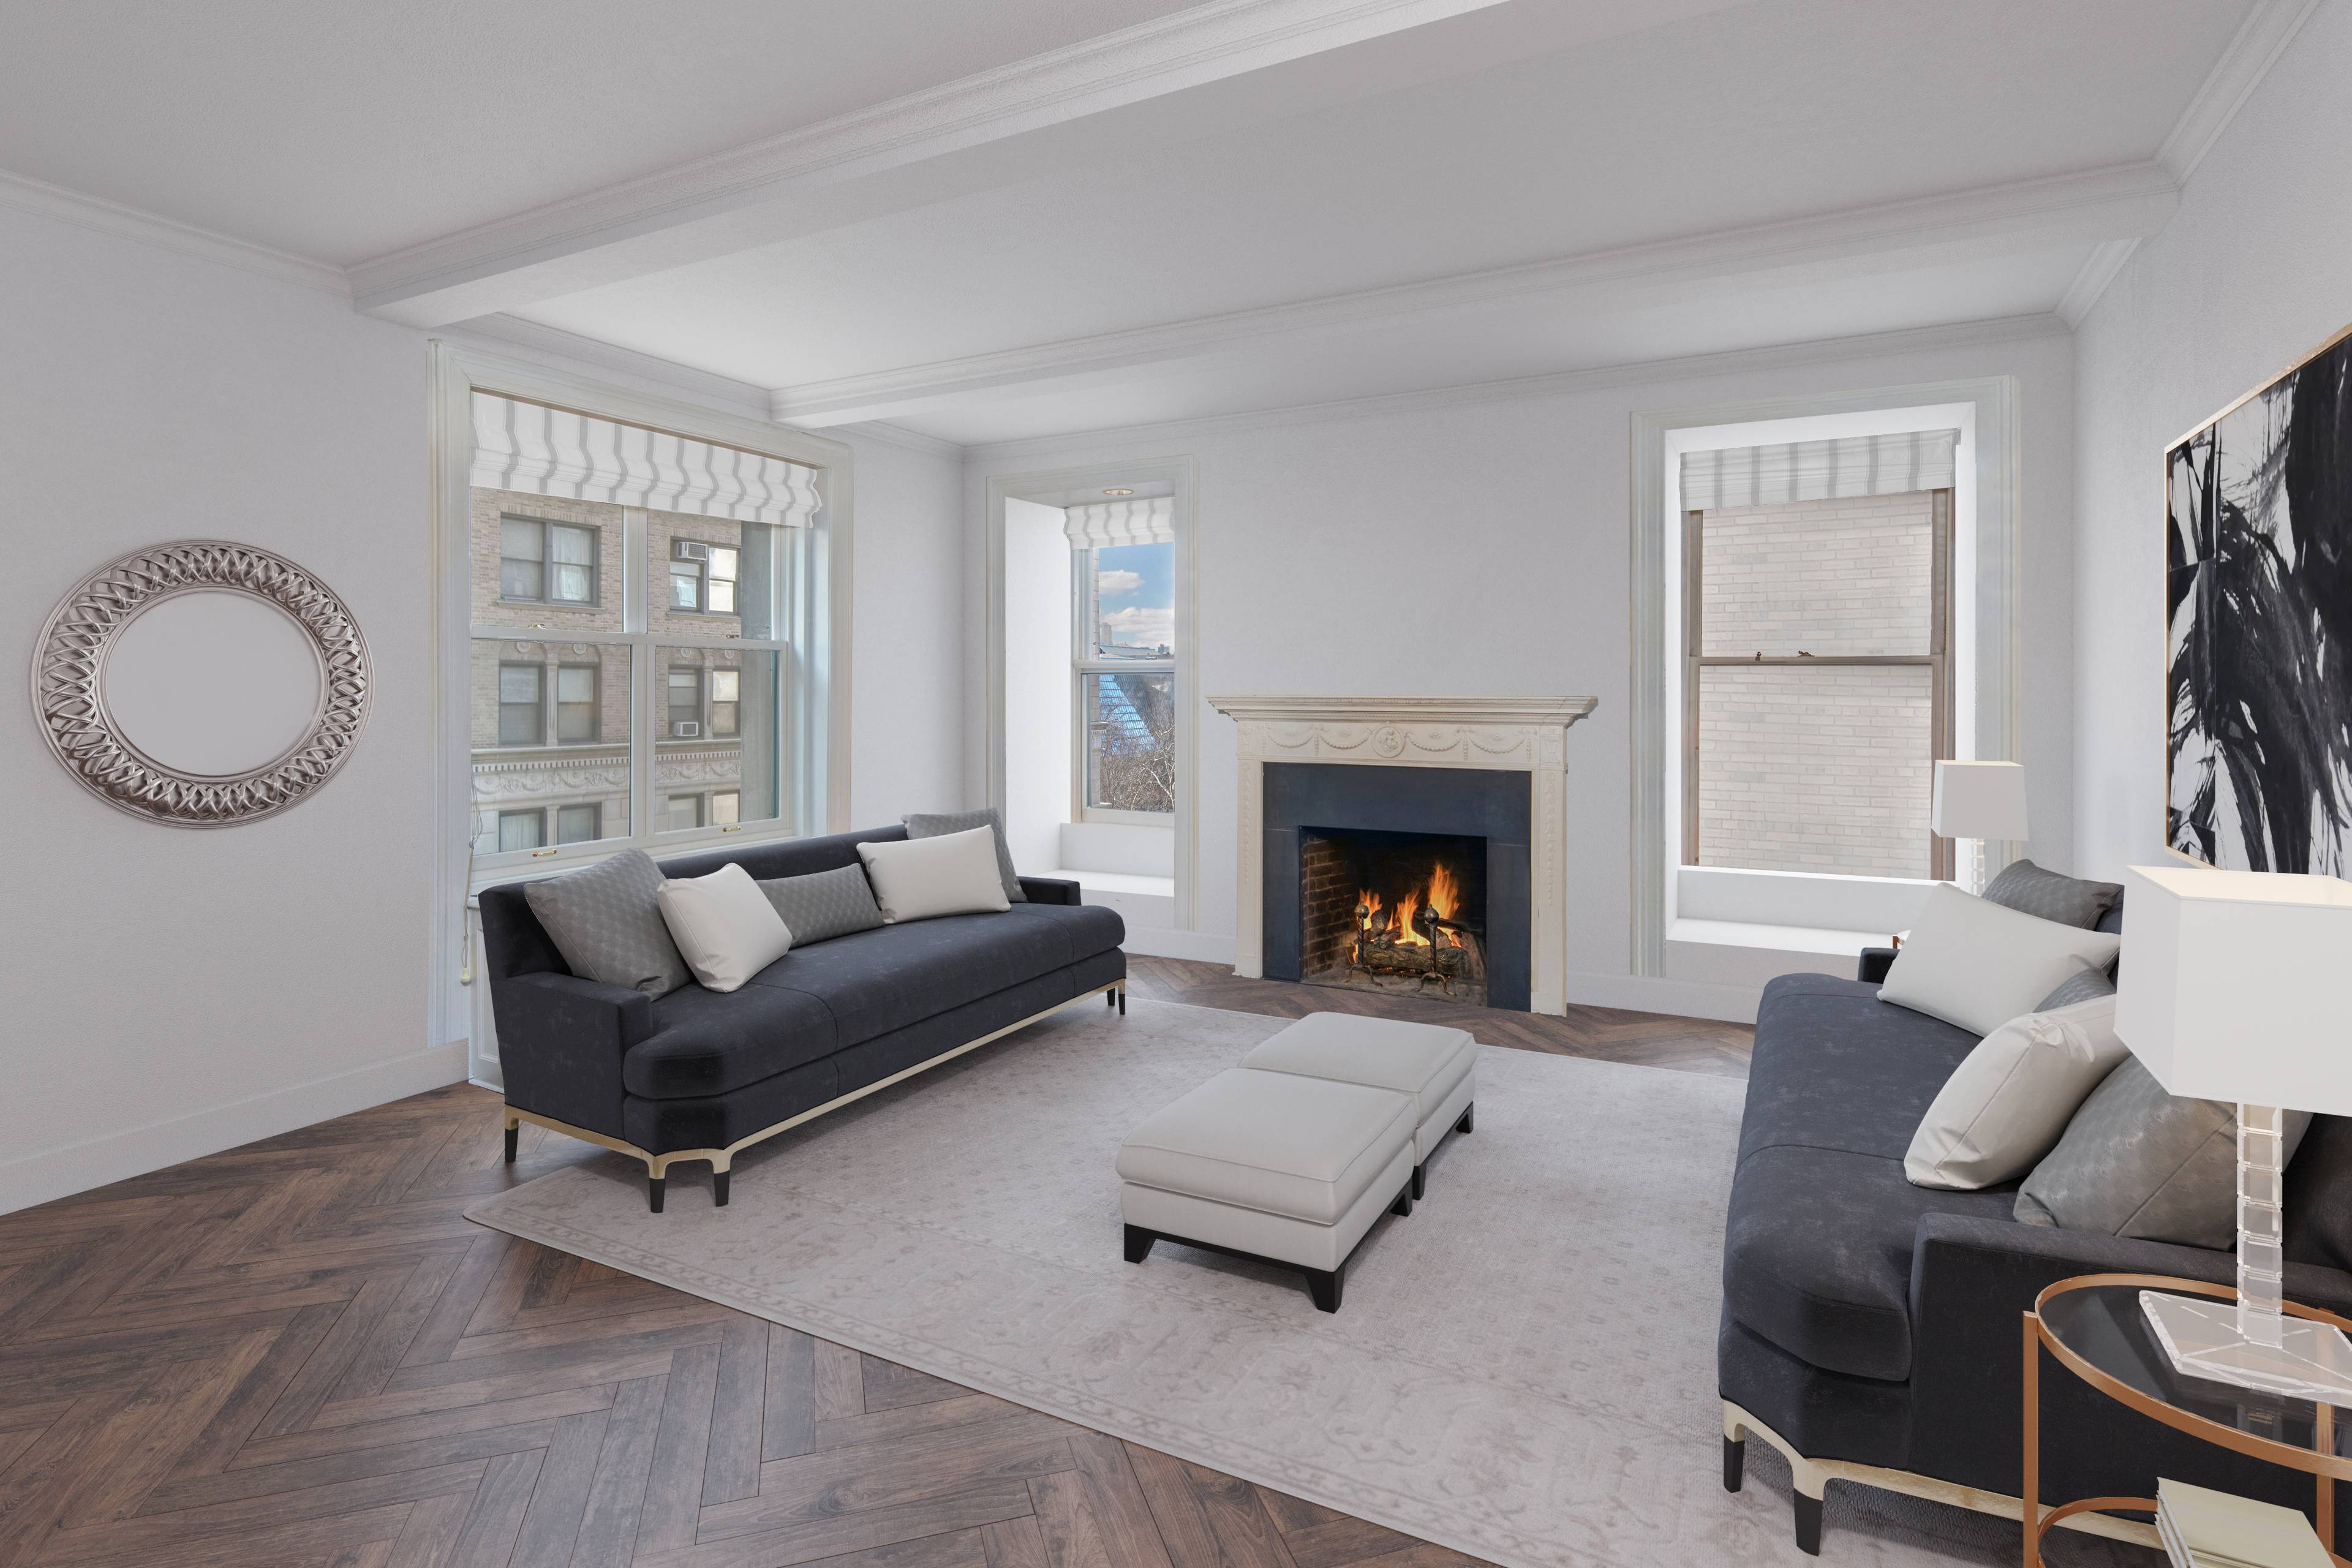 Spread out in a true 3 bedroom with prewar details like herringbone oak floors, high beamed ceilings, and a wood burning fireplace.